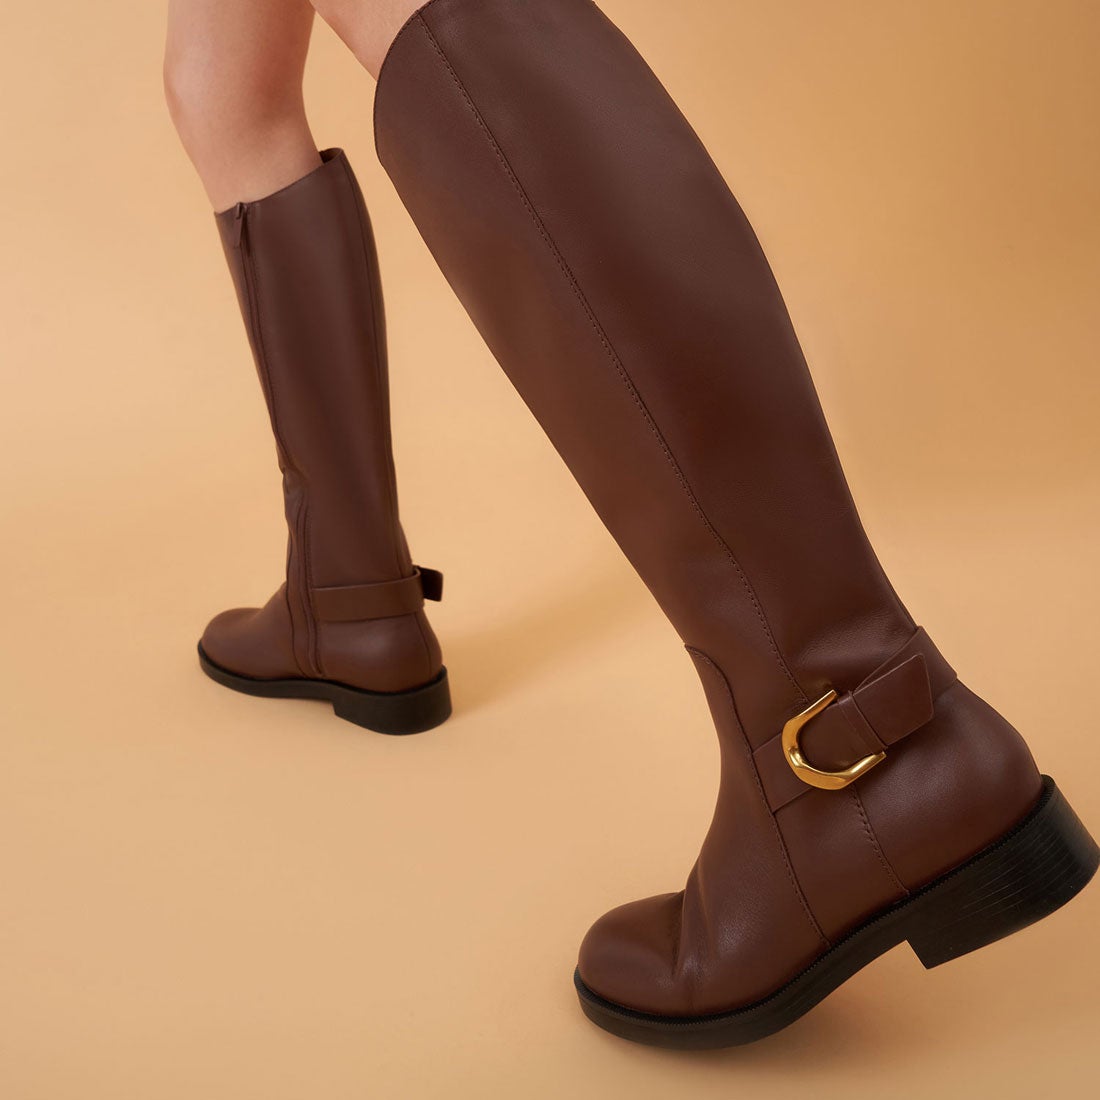 【2021 WINTER】ガビーヌ バックルドレザーニーハイブーツ / Gabine Buckled Leather Knee-High Boots  （Brown）